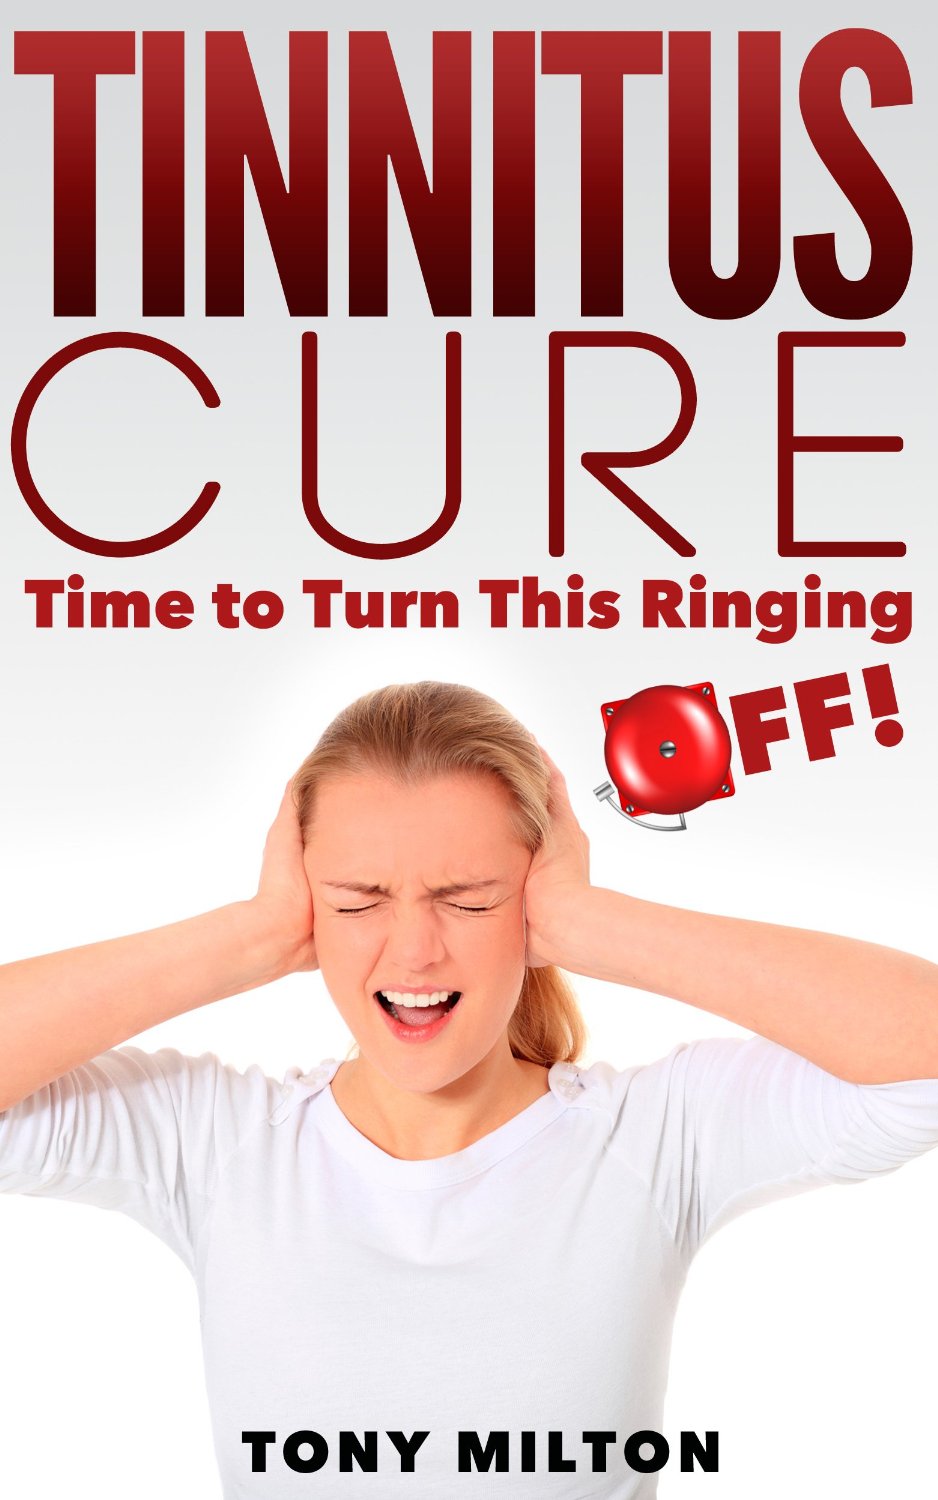 Tinnitus Cure: Time To Shut This Ringing OFF! [Kindle Edition] by Tony Milton